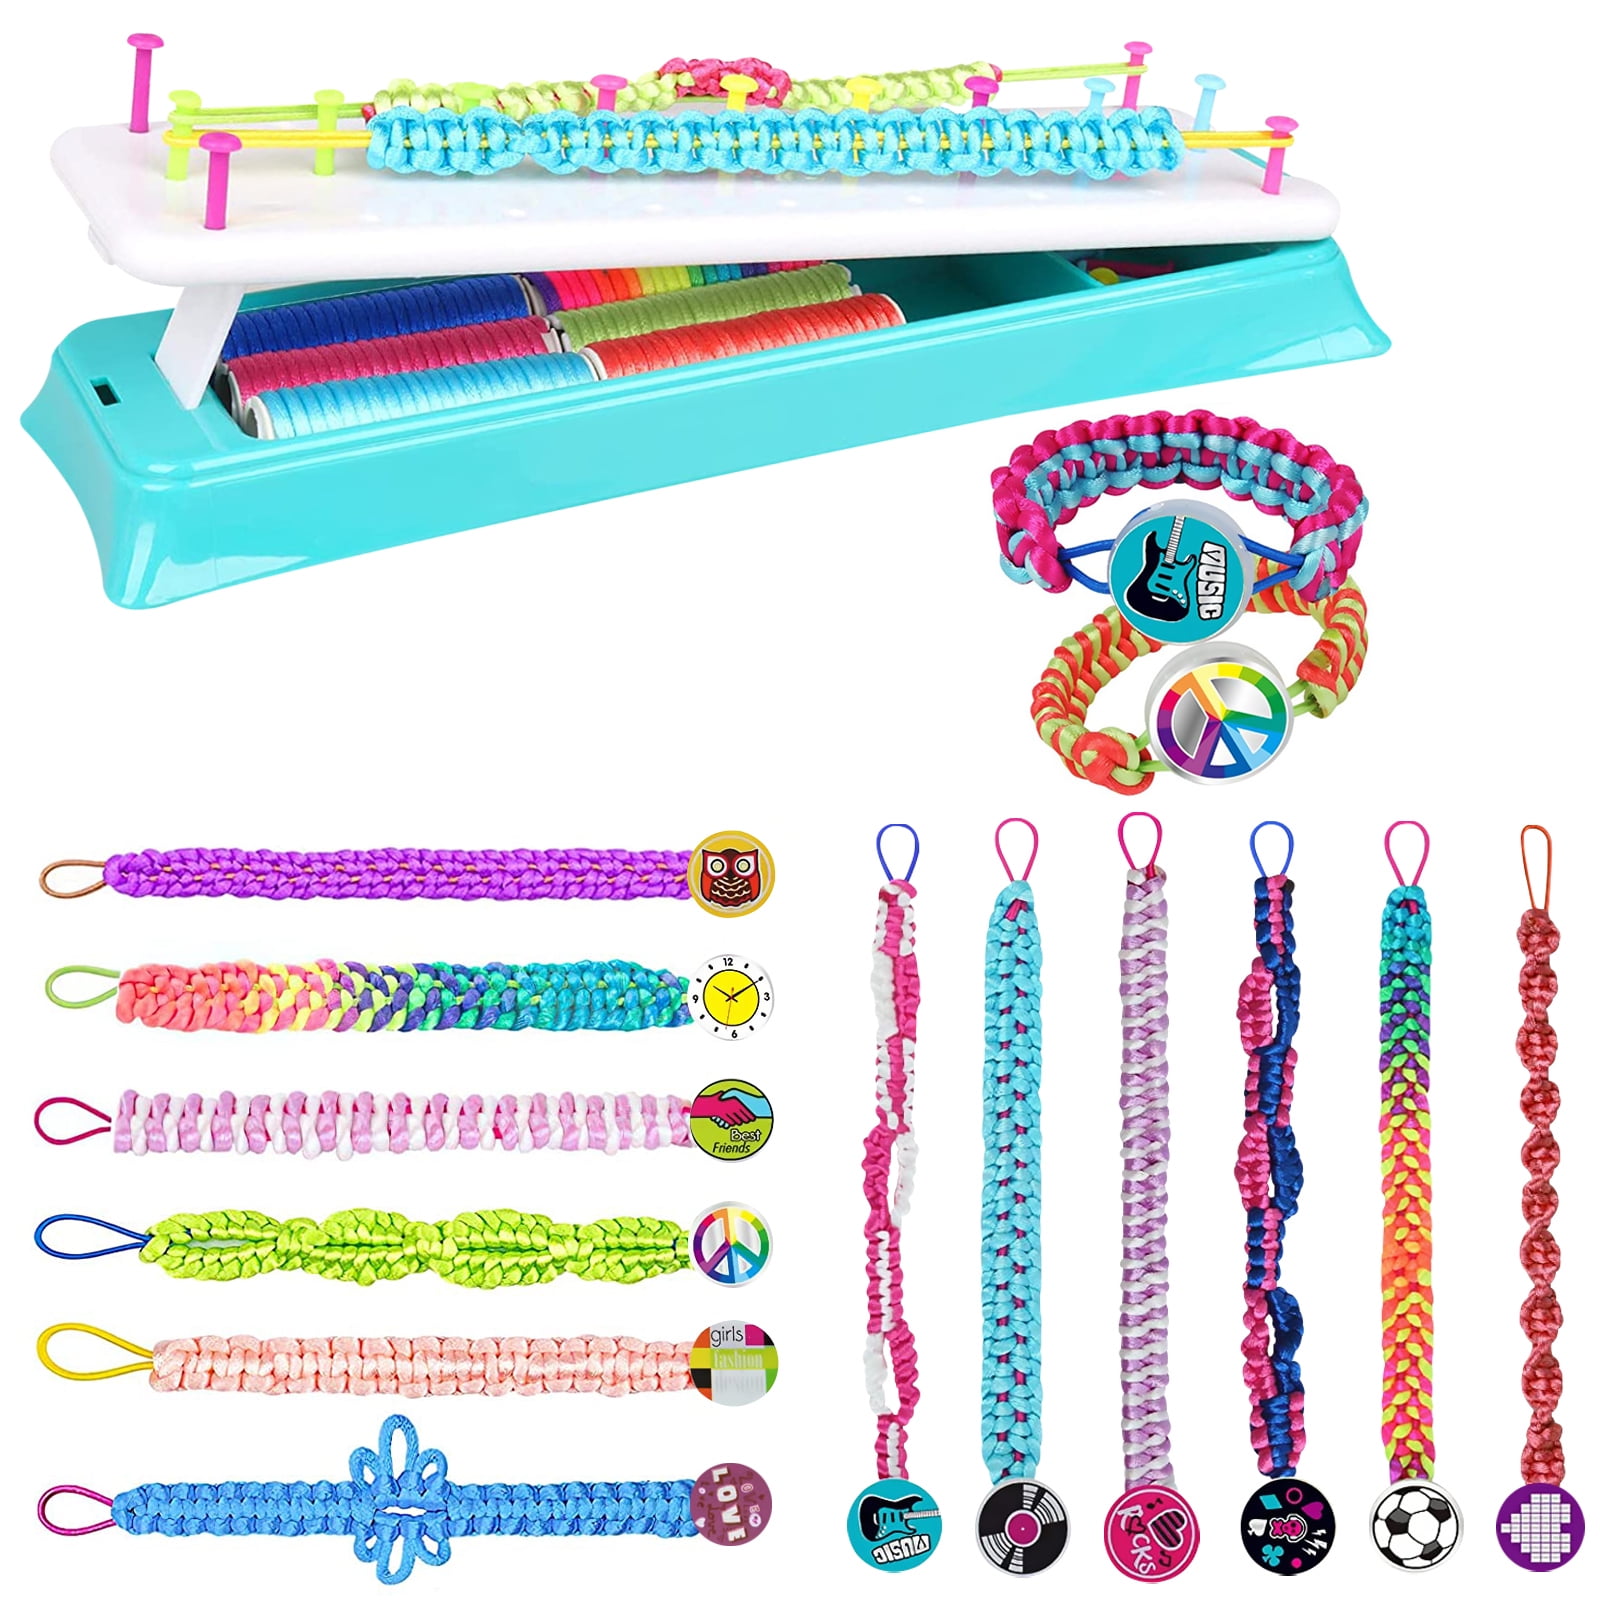 Friendship Bracelet Making Kit Toys, DIY Crafts for Girls Ages 8-12,  Hottest Birthday Christmas Gifts for 7 8 9 10 11 12 Years Old Kids, Travel